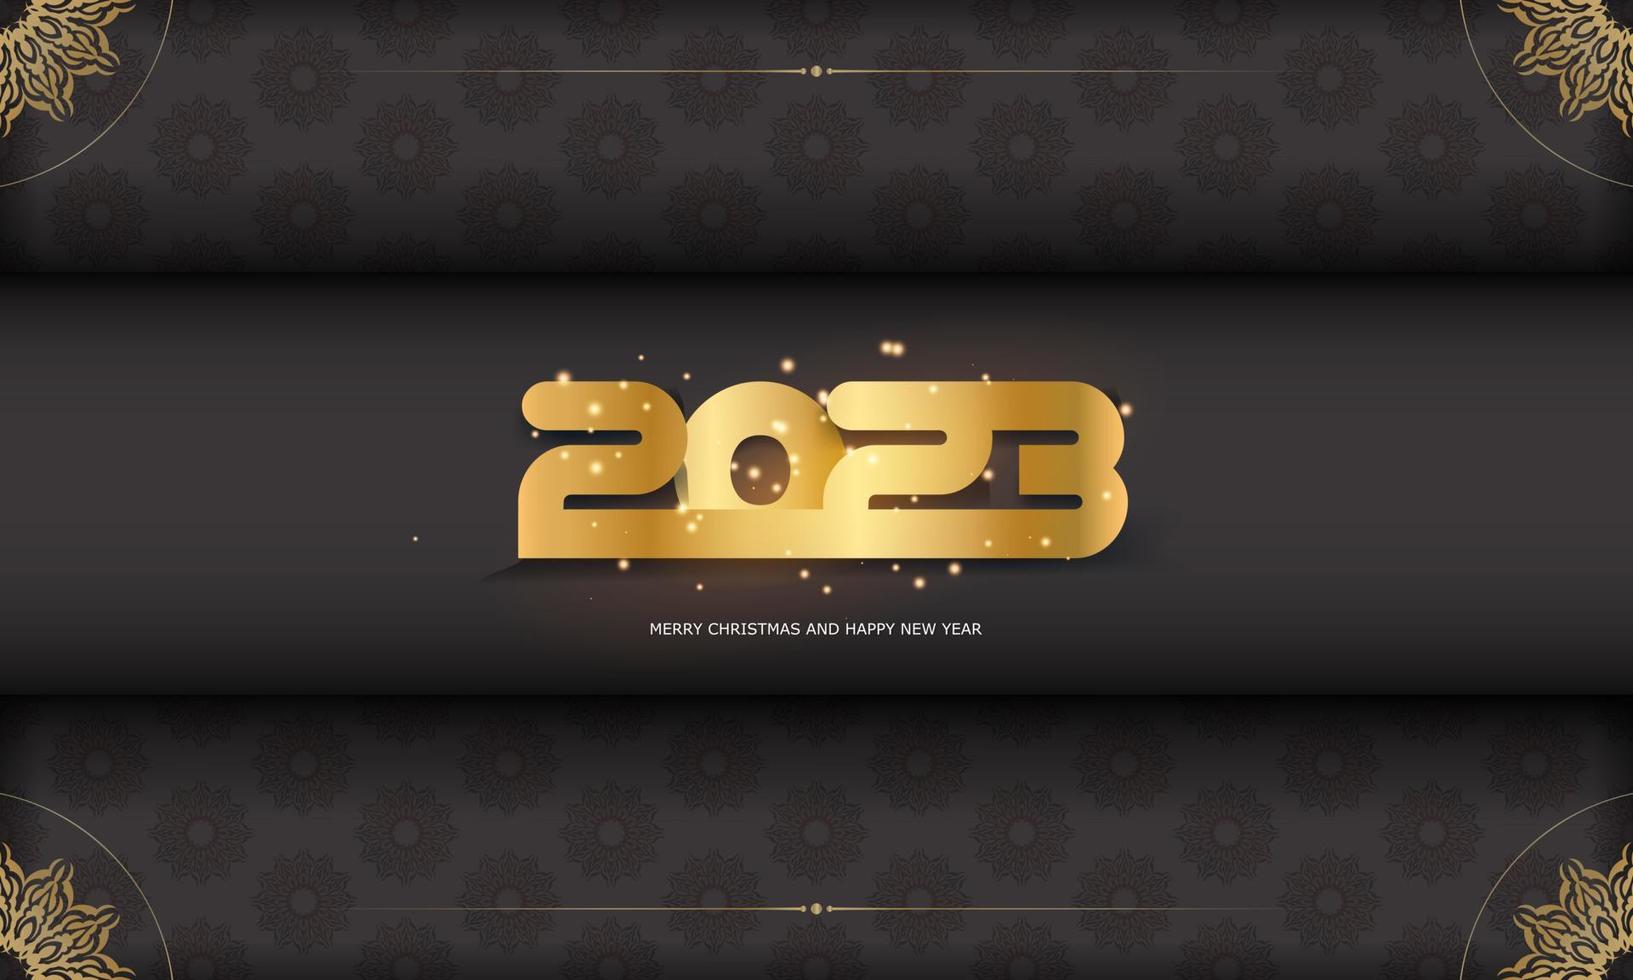 Black and gold color. Happy new year 2023 holiday card. vector